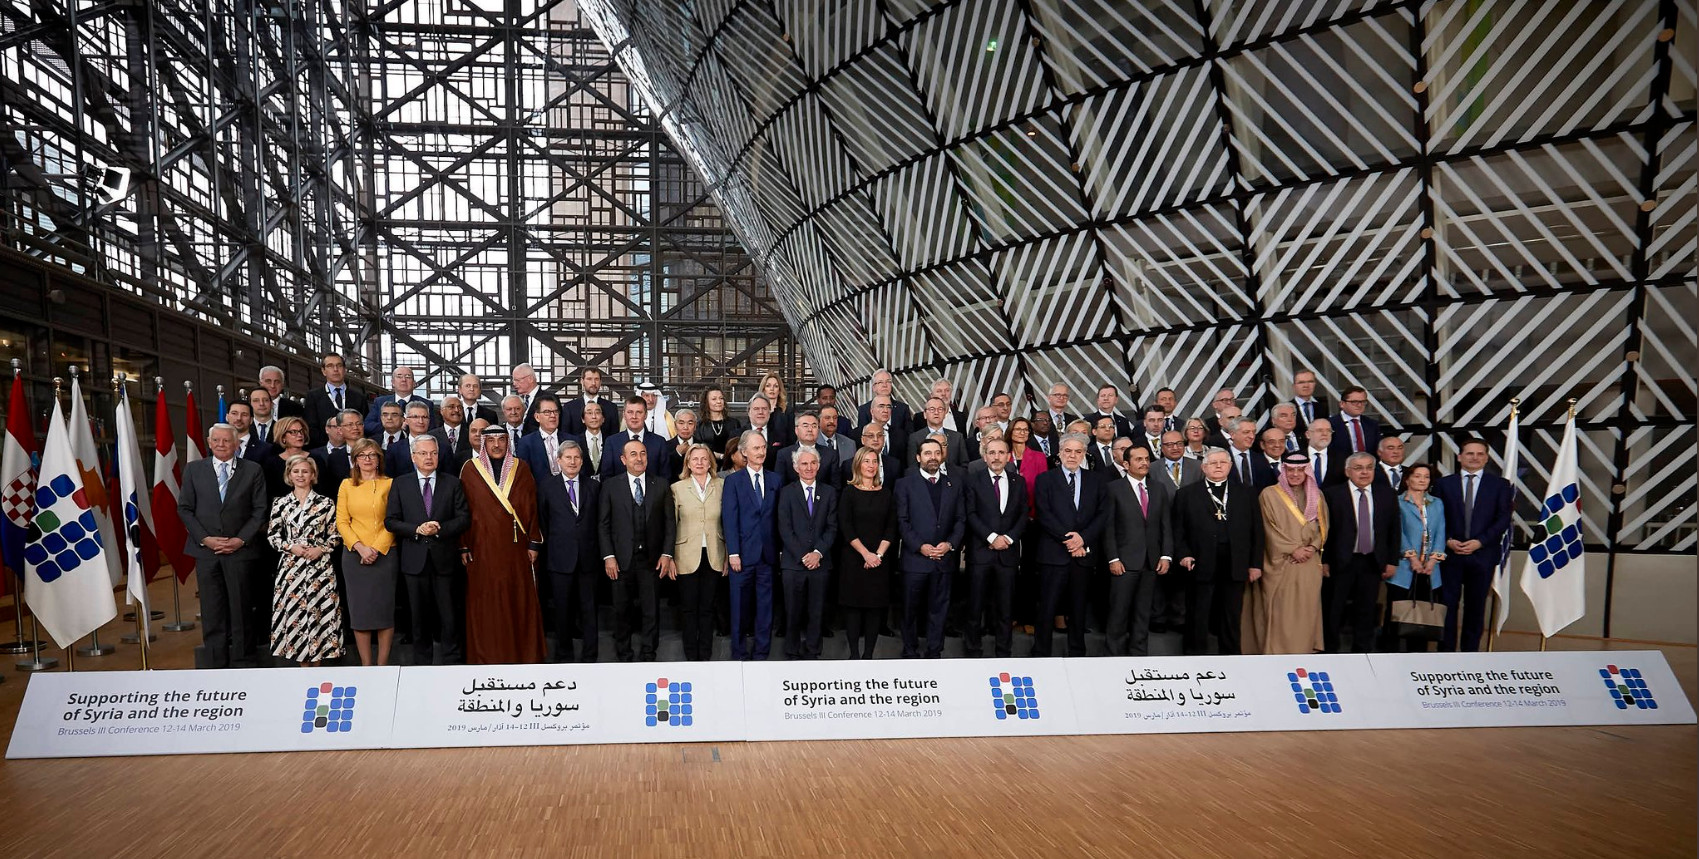 Representatives of the participatory countries in the Brussels III Conference in Support of Syria - March 14, 2019 (near_eu Twitter)